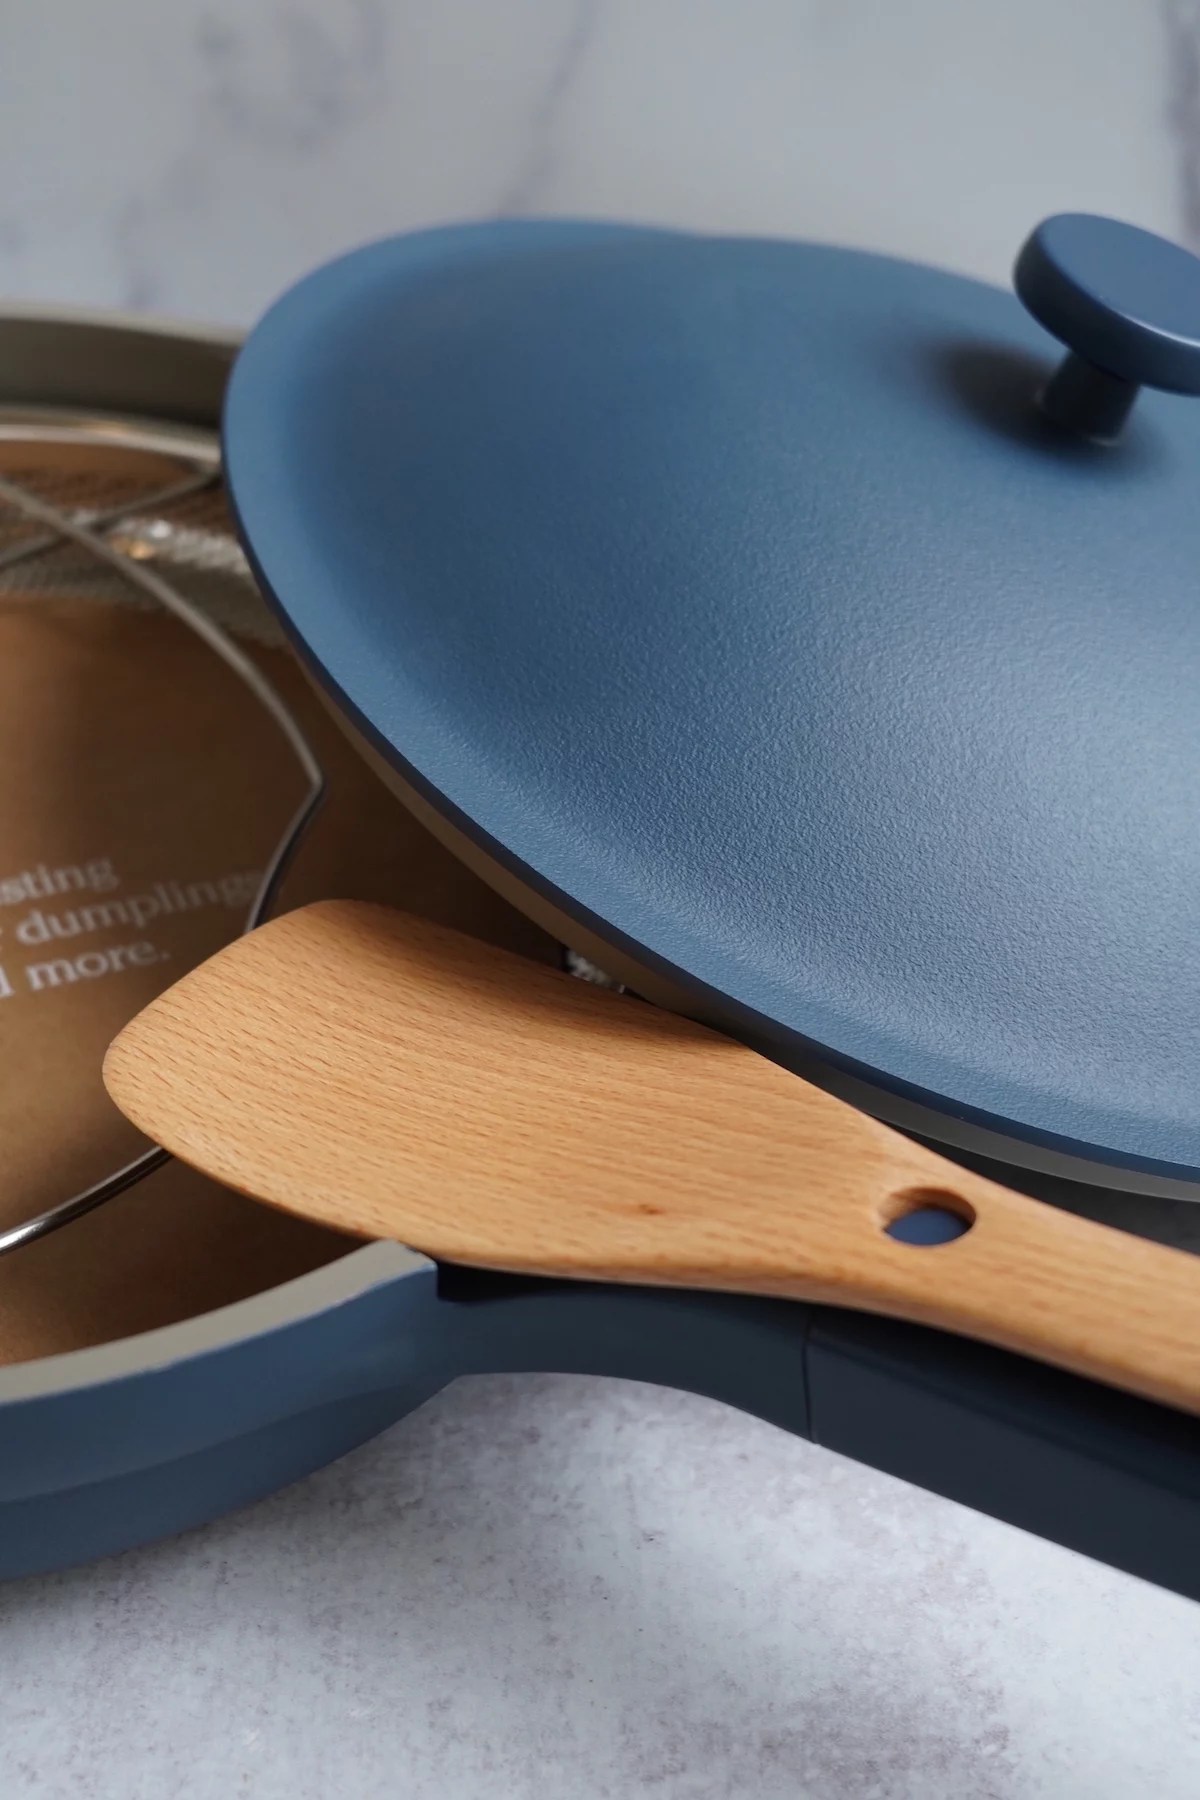 Our Place just released the Always Pan 2.0! Here's a review of the new